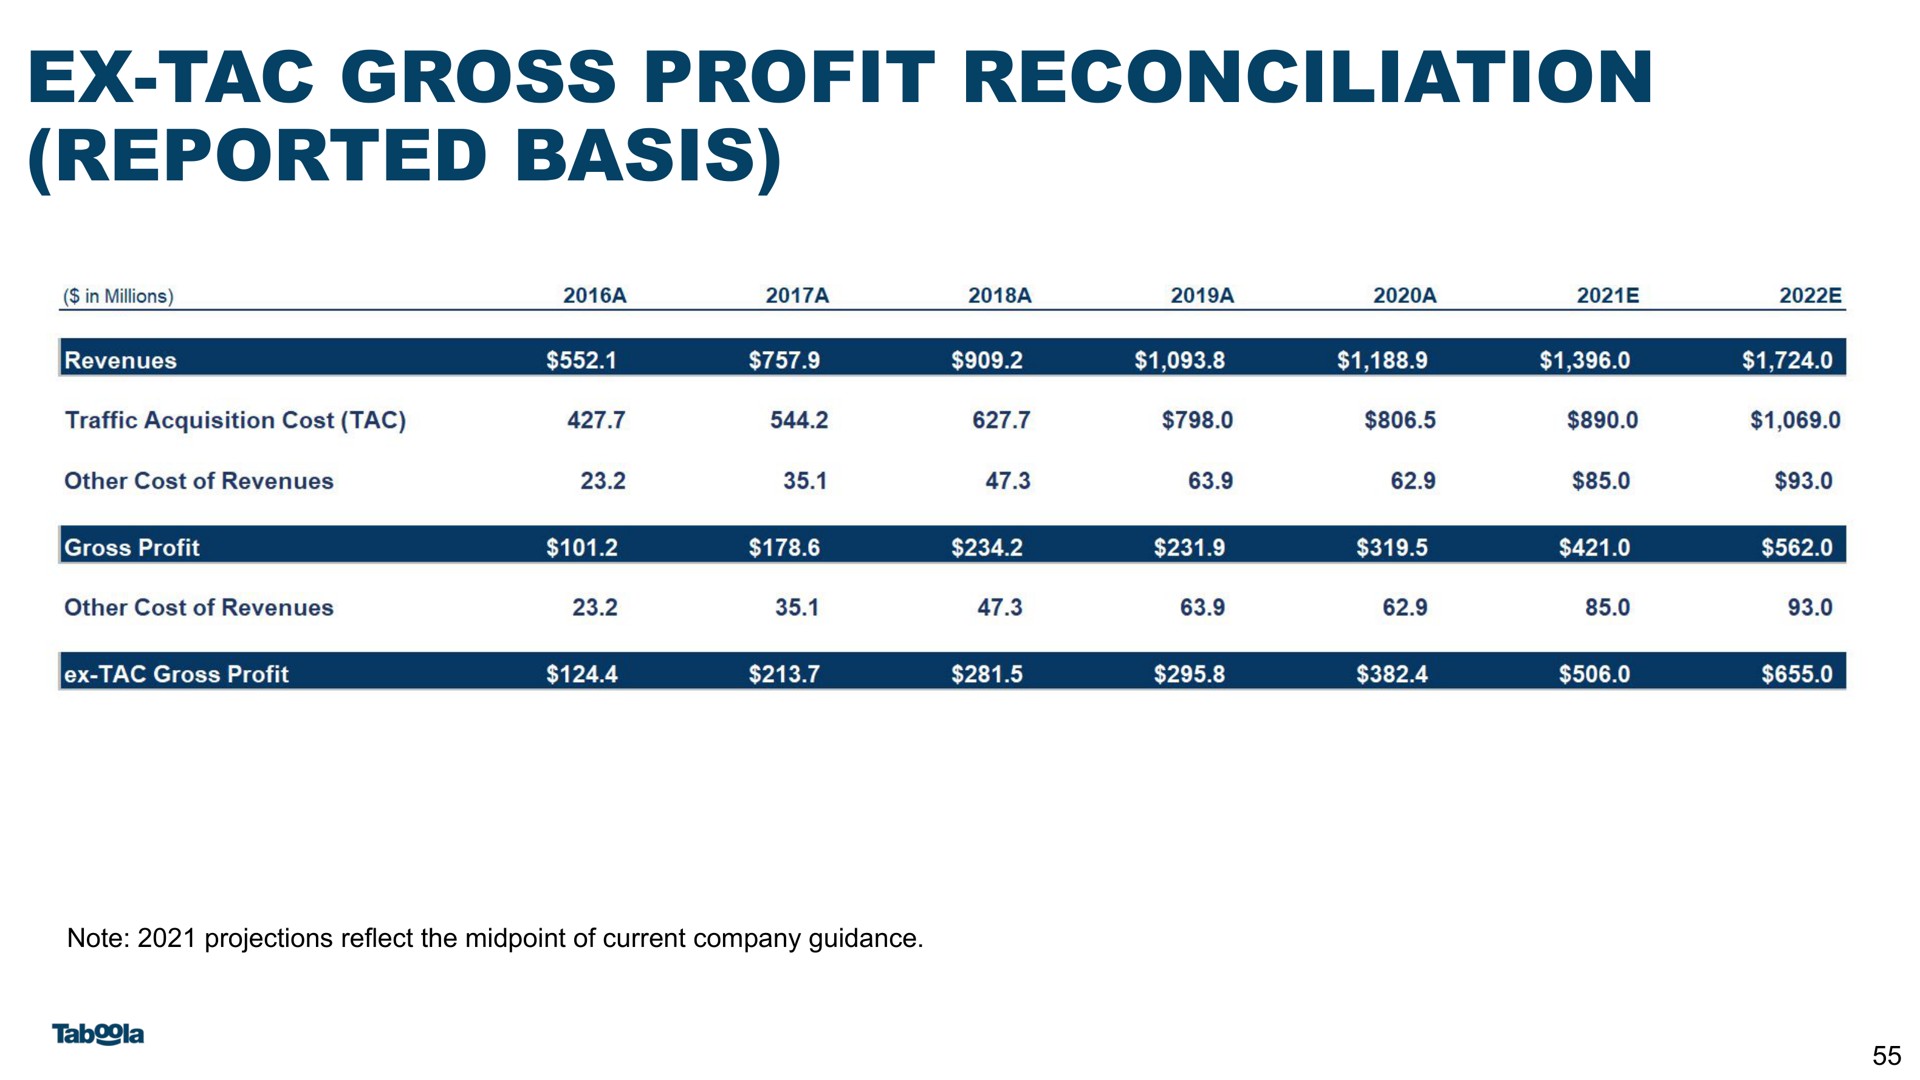 gross profit reconciliation reported basis | Taboola